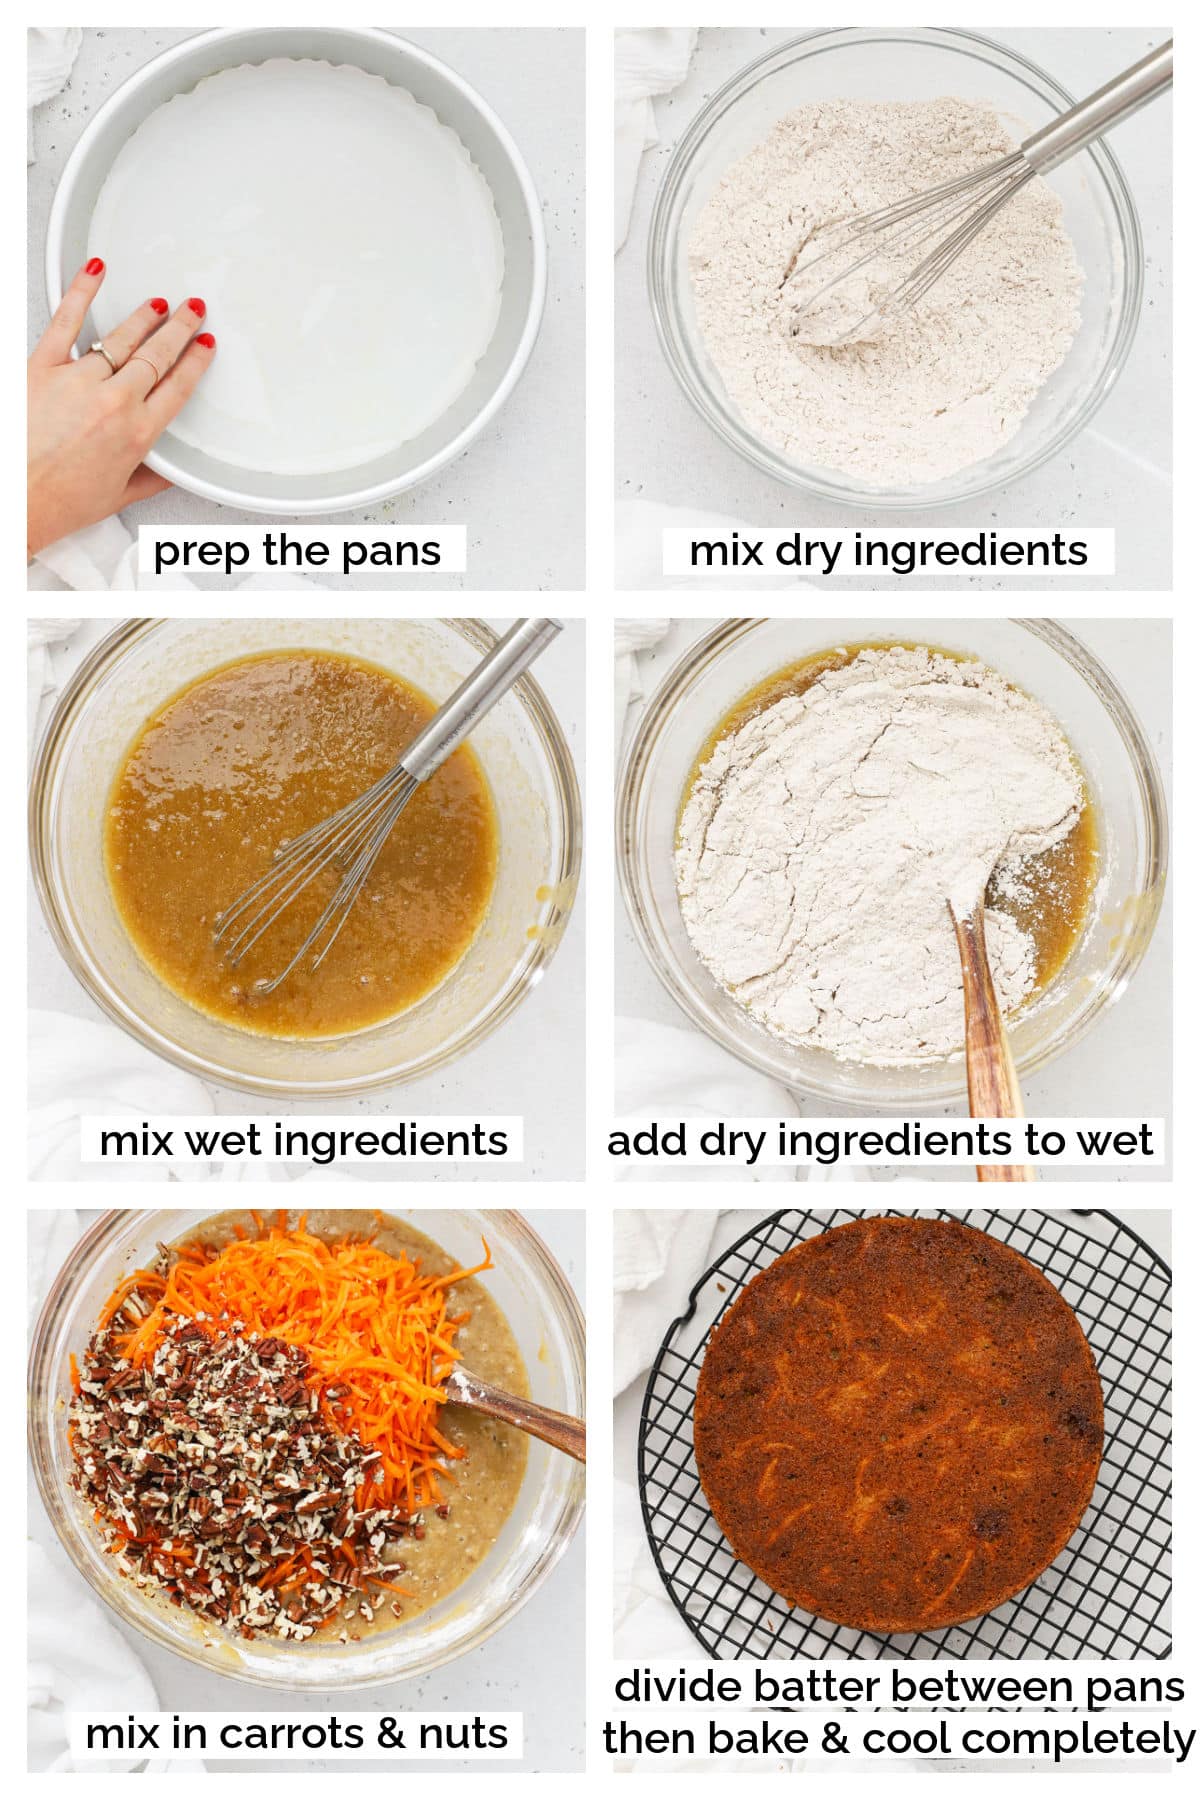 mixing up a gluten-free carrot cake batter, step by step